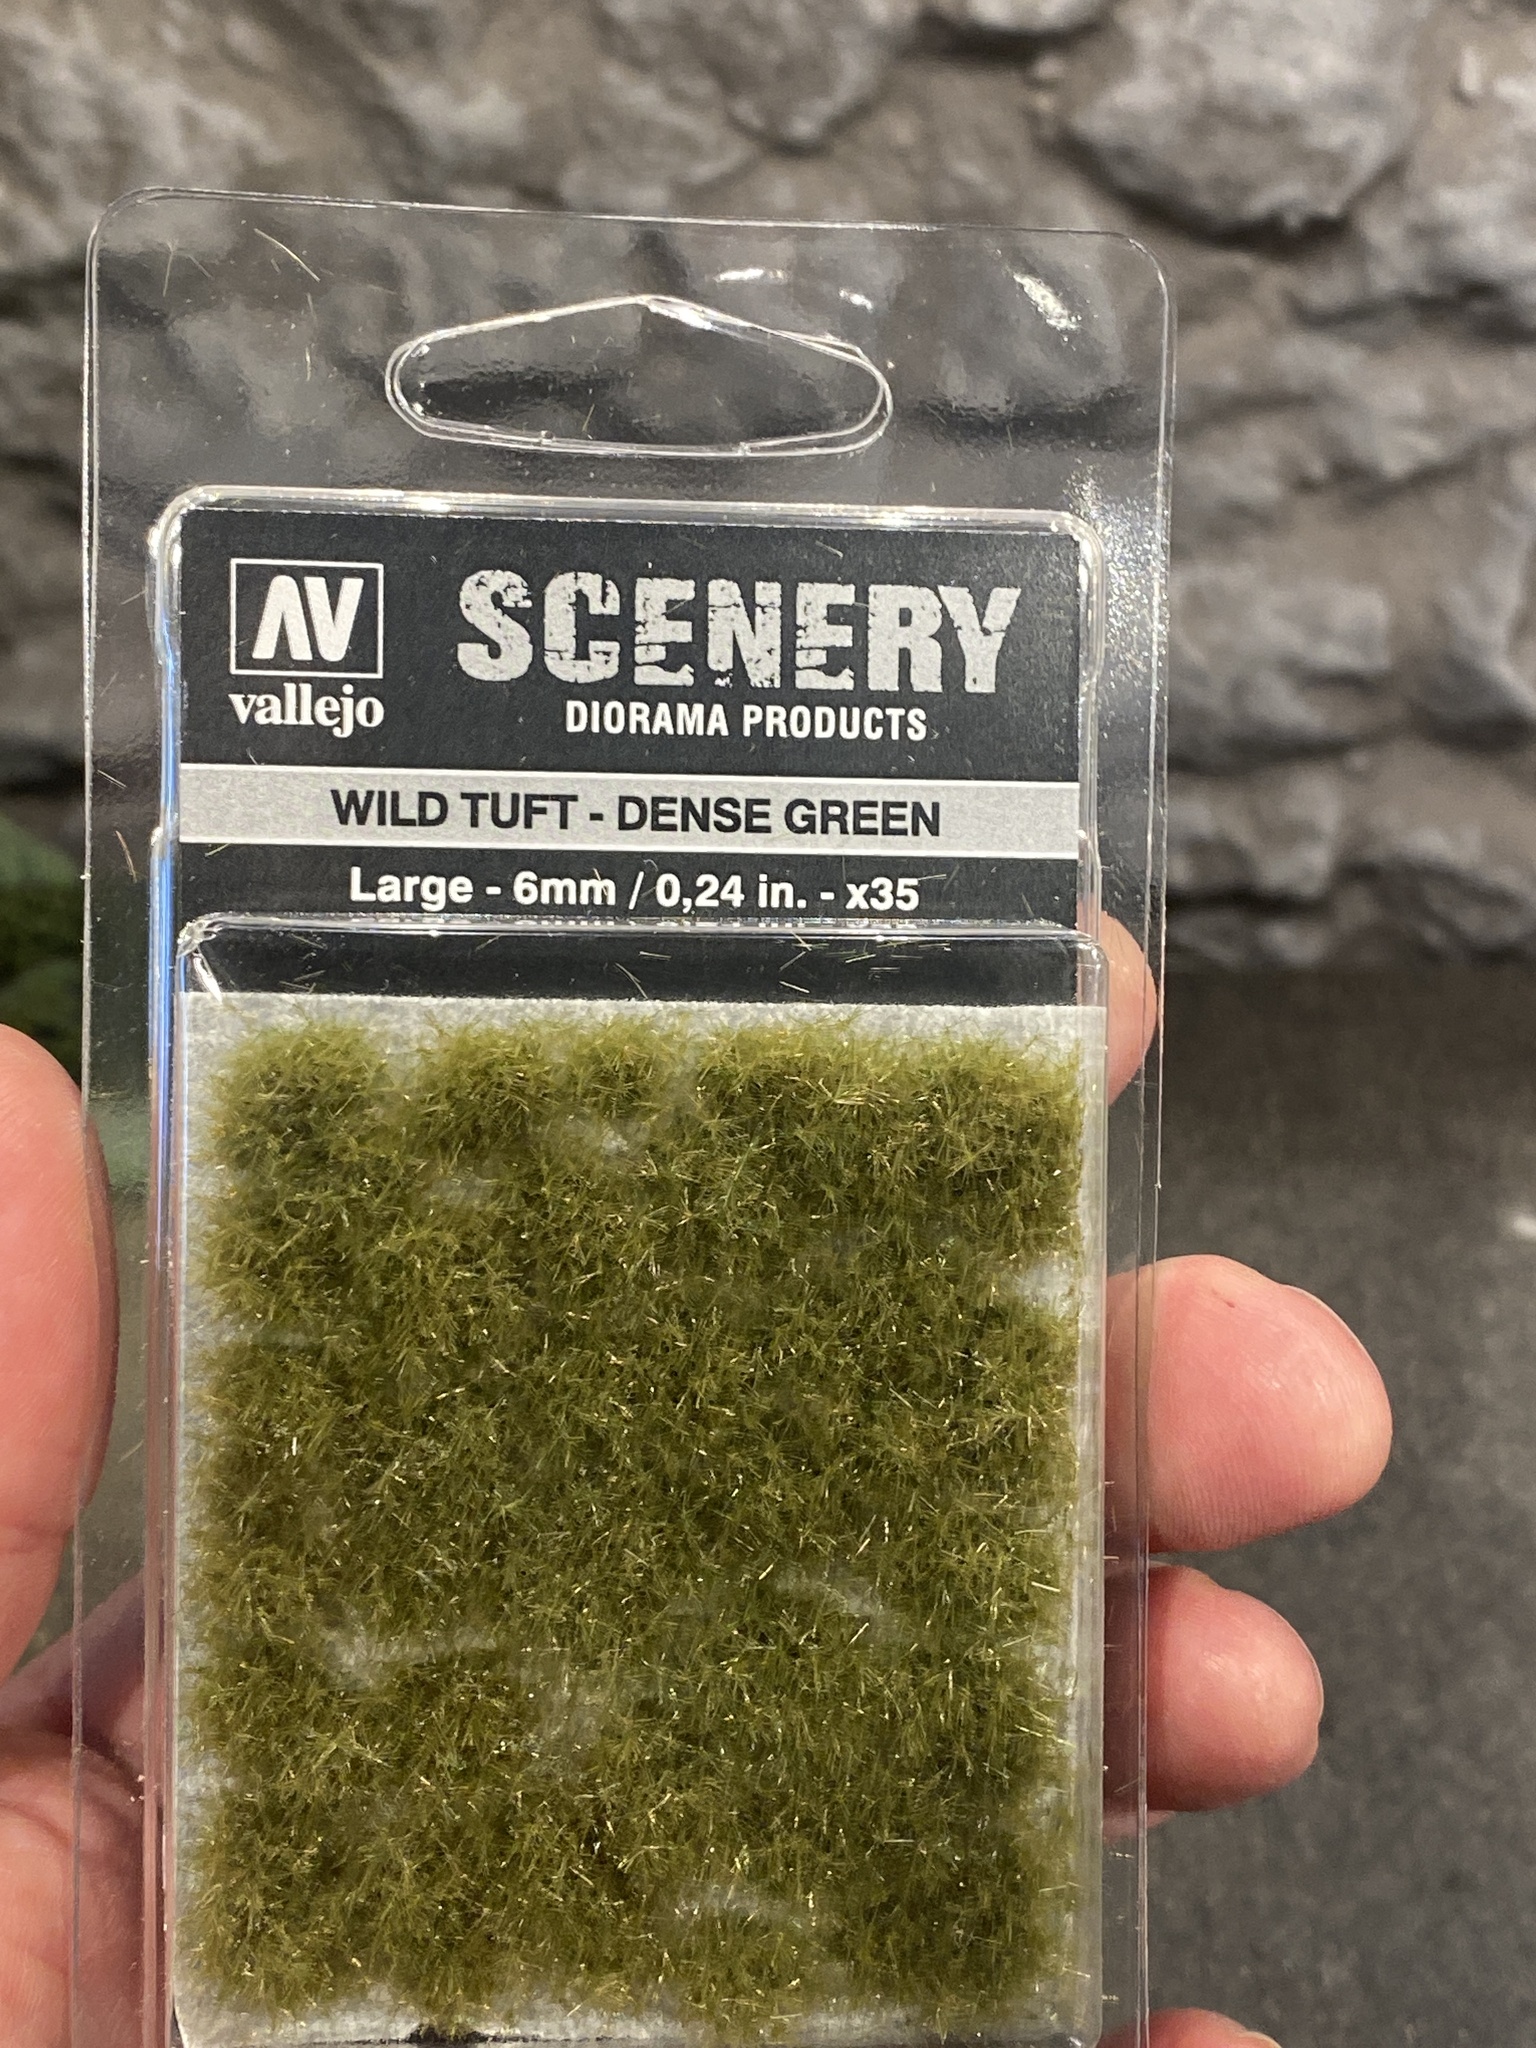 Scenery Diorama Products - Wild Tuft - Dense Green - Large  6 mm SC413 fr Vallejo